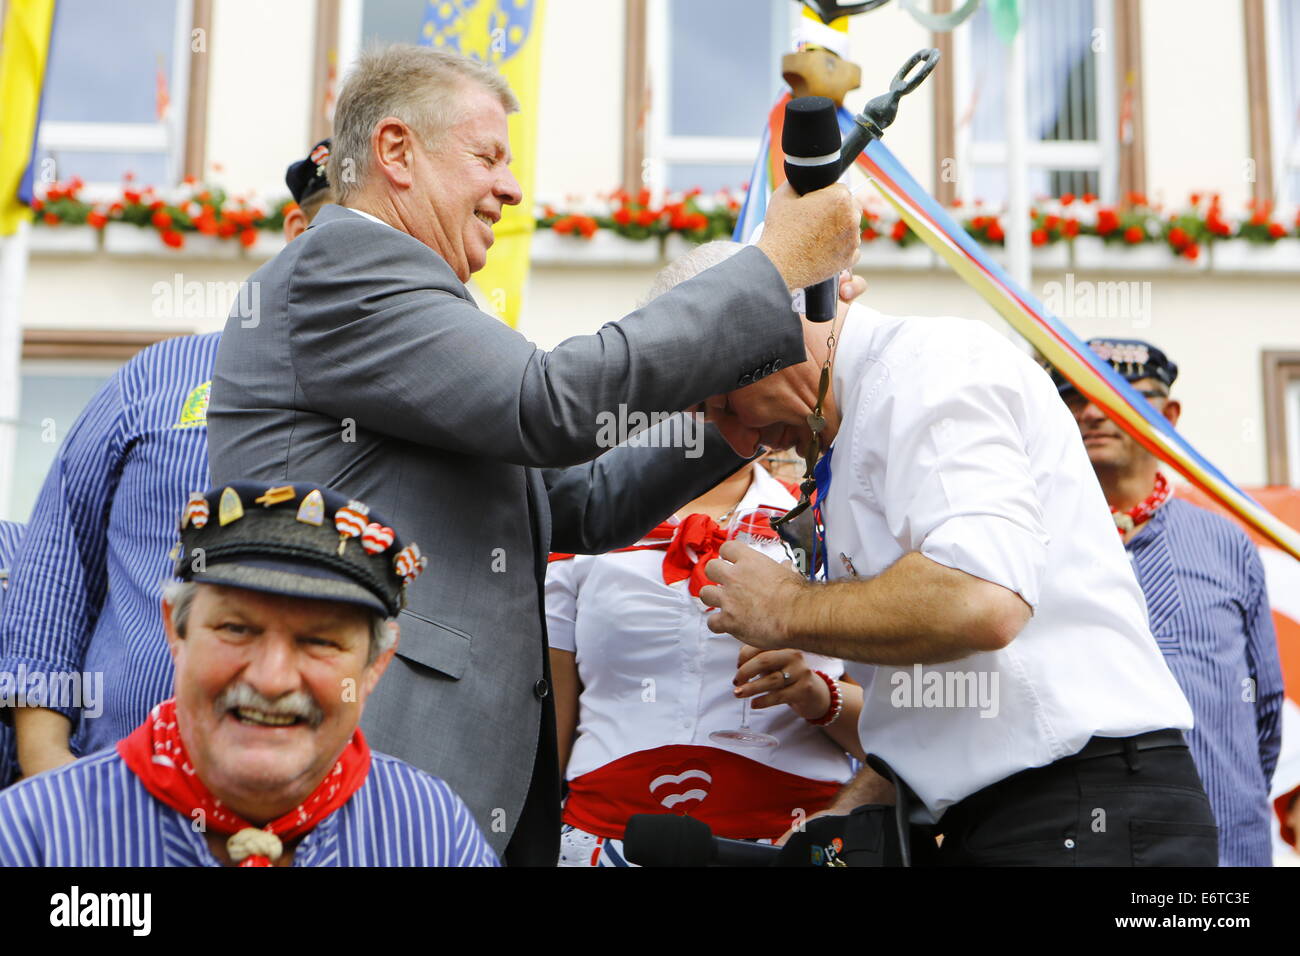 Worms, Germany. 30th August 2014. The Lord Mayor of Worms, Michael Kissel (SPD), hands over the chain of his office to the BojemŠŠschter vun de FischerwŠŠd (mayor of the fishermenŠs lea), Markus Trapp, who keeps it until the end of the festival. The largest wine fair along the Rhine, the Backfischfest, started in Worms with the traditional handing over of power from the Lord Mayor to the mayor of the fishermenÕs lea. The ceremony included dances and music. Stock Photo